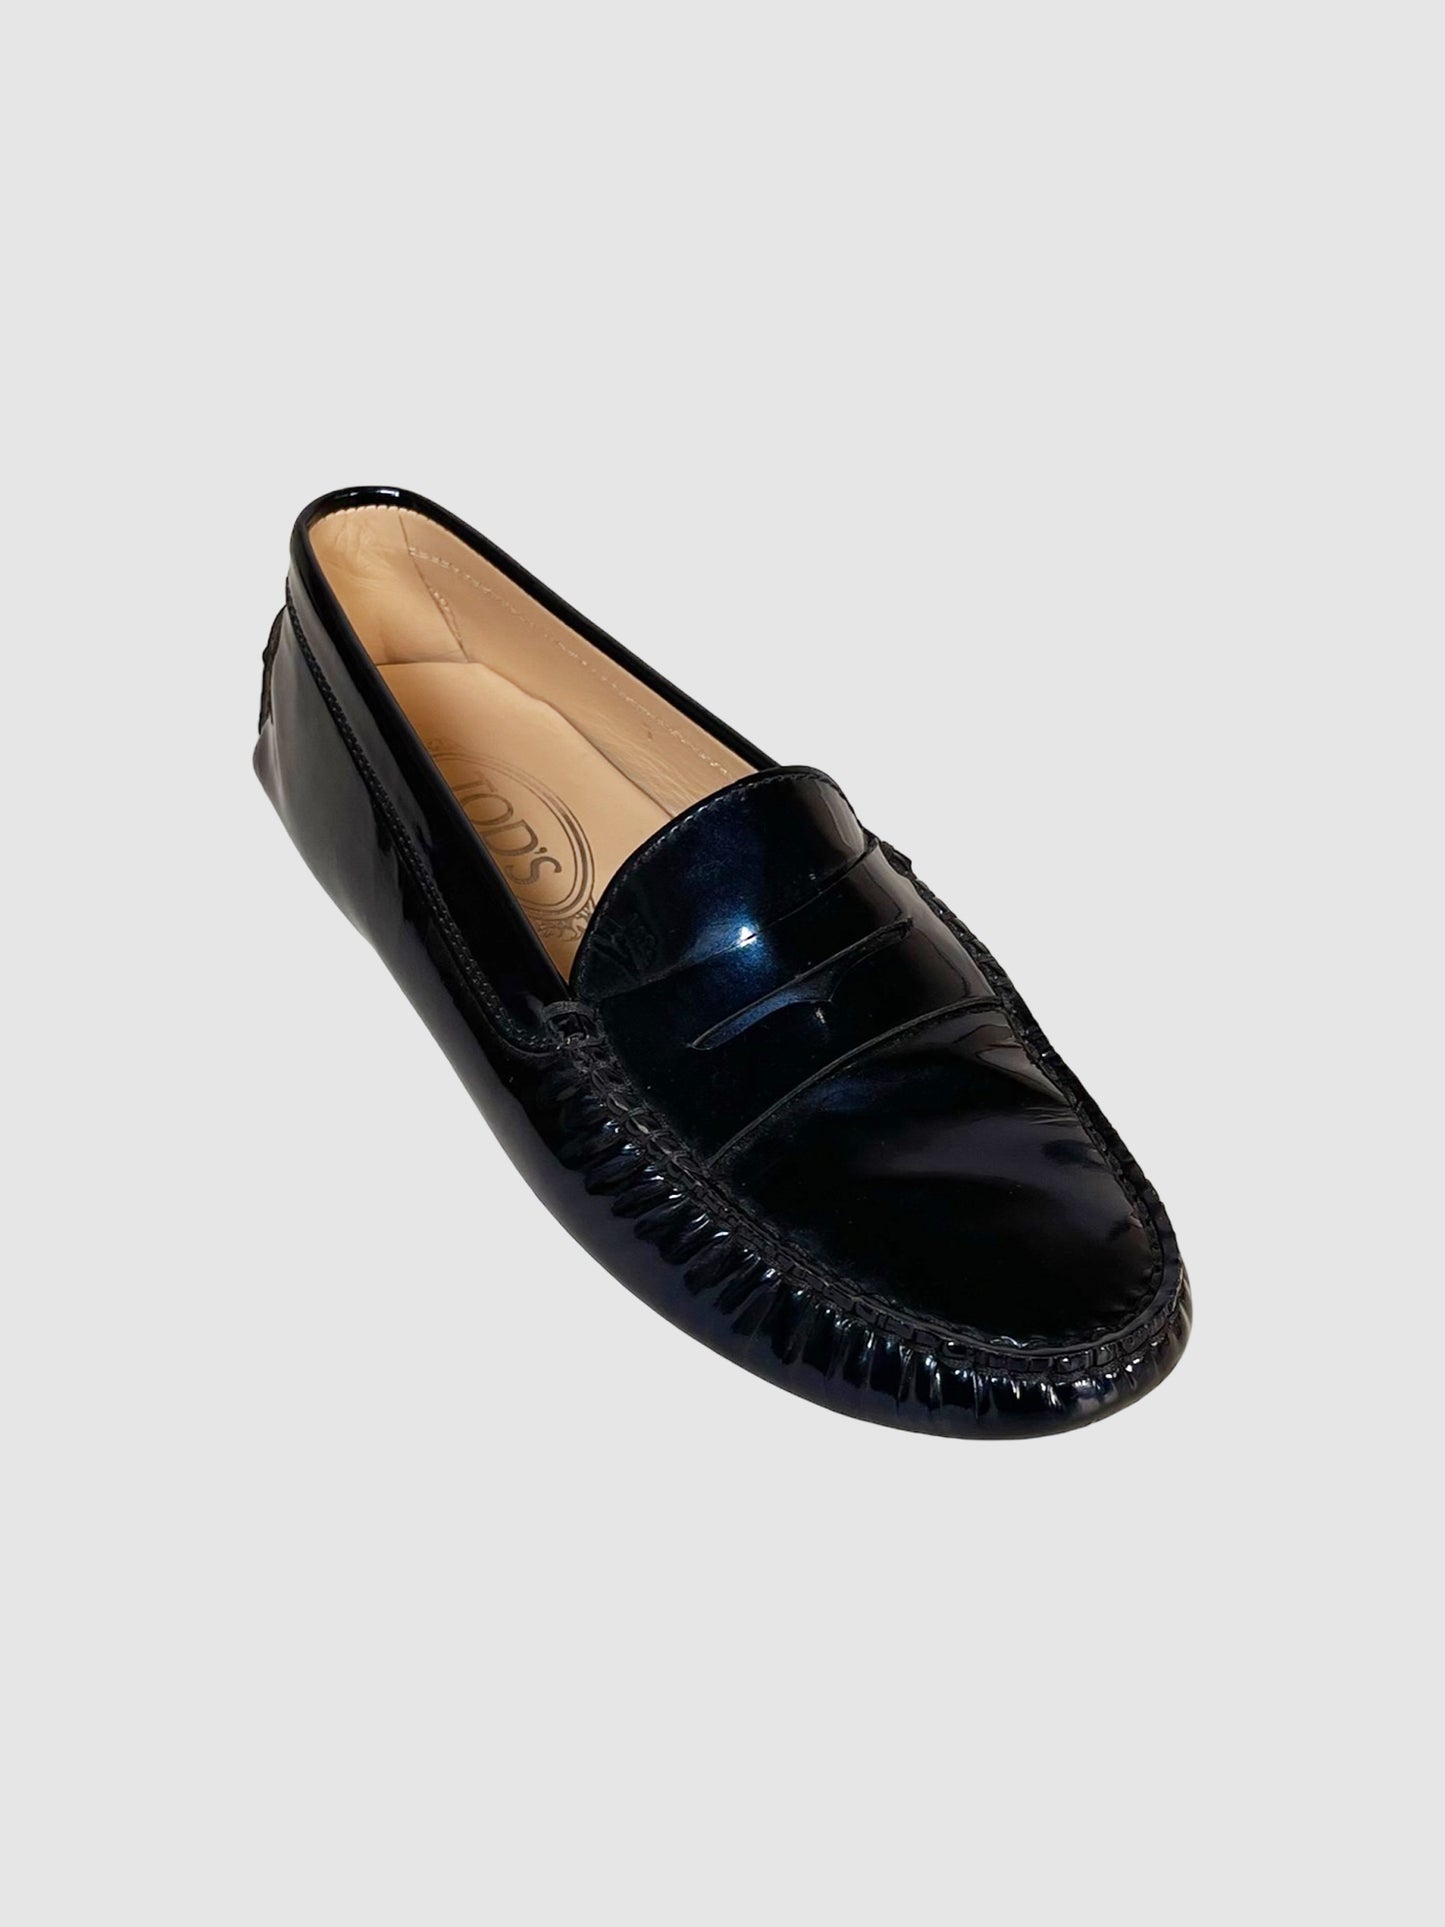 Tod's Metallic Patent Loafers - Size 7